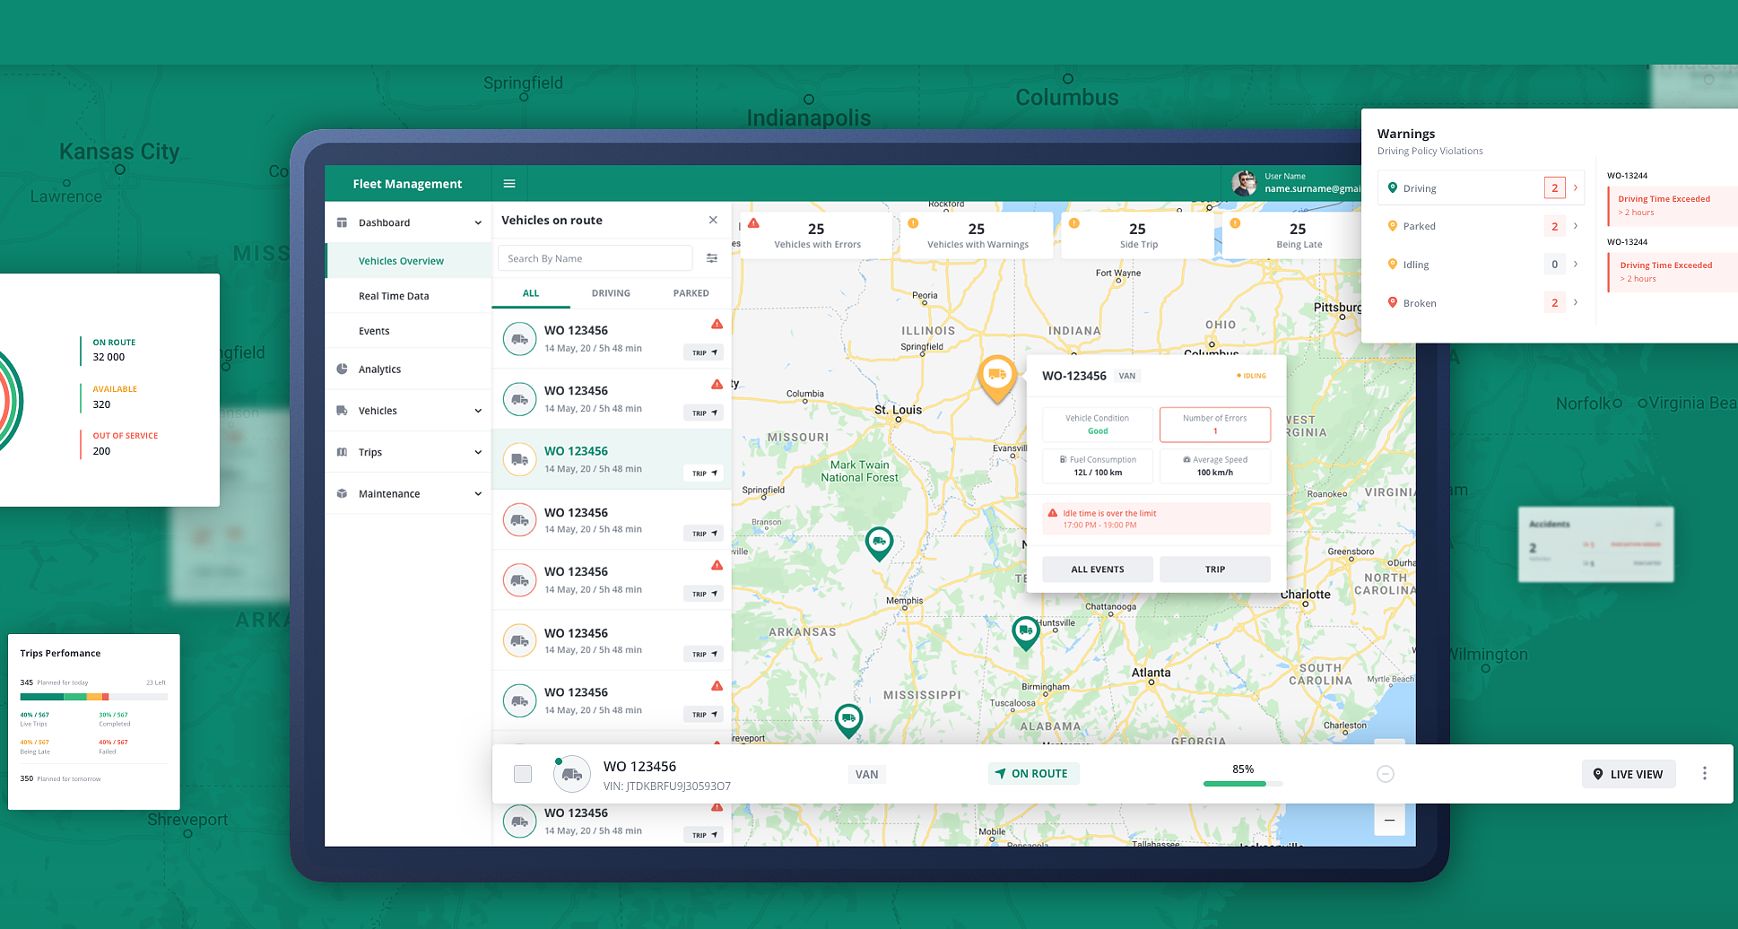 Vehicle tracking in a fleet management system